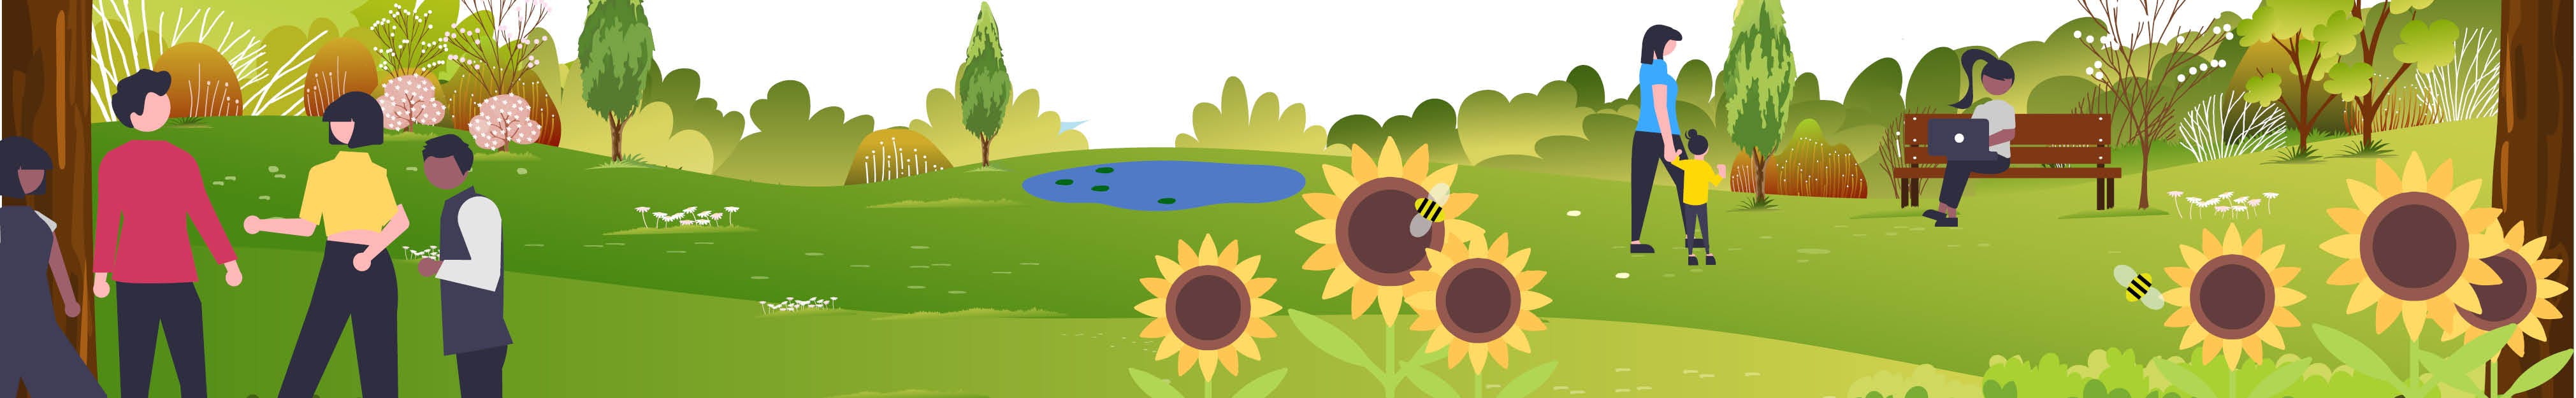 Design illustration of Heigham Park featuring a pond, people, and sunflowers.